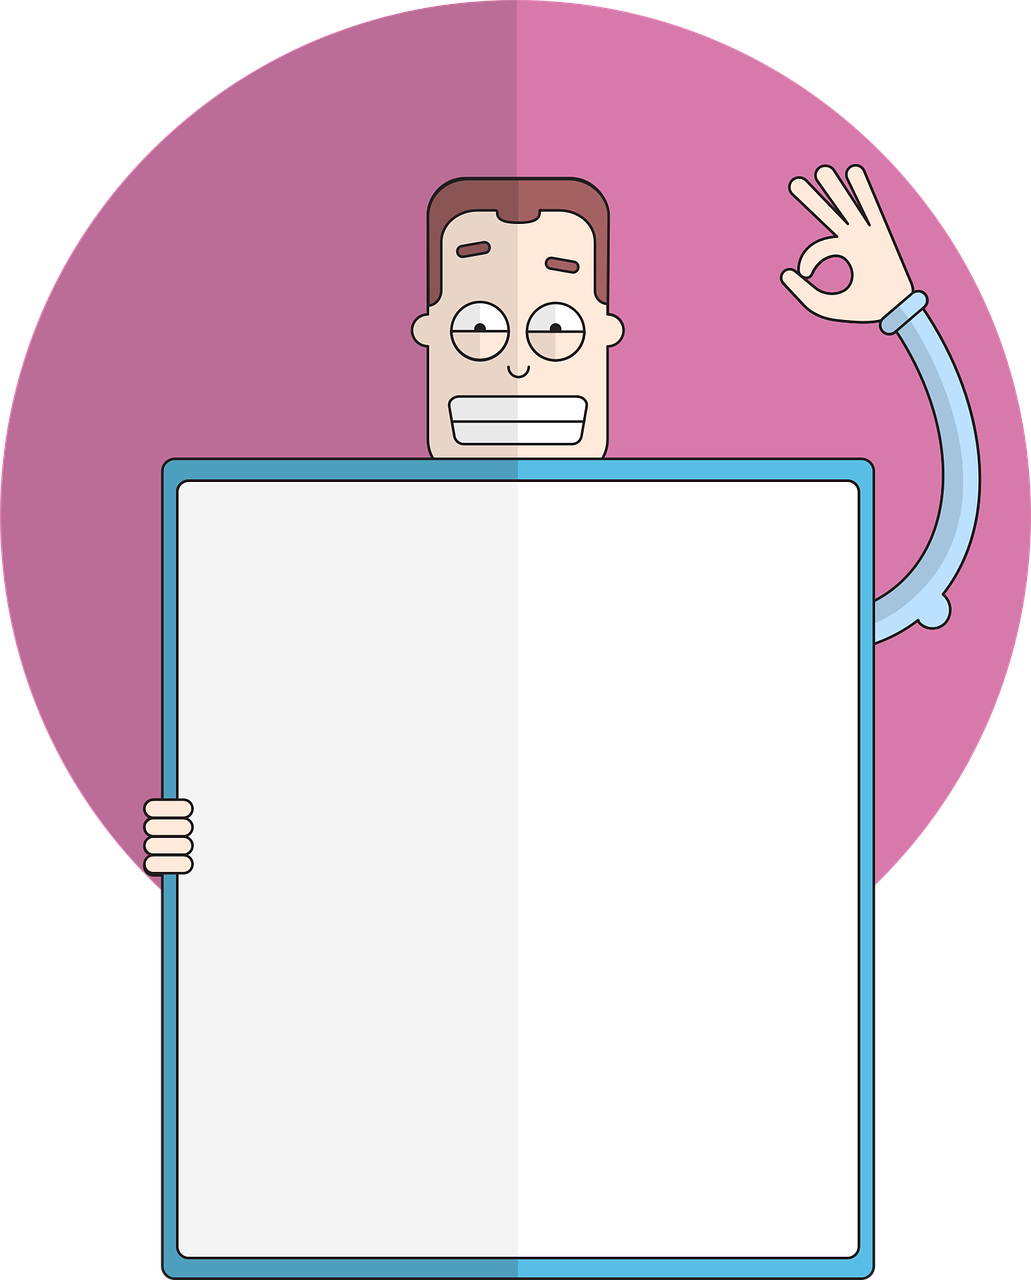 a man holding a sign in front of his face, a cartoon, computer art, whiteboards, abstract people in frame, rounded corners, sleek design